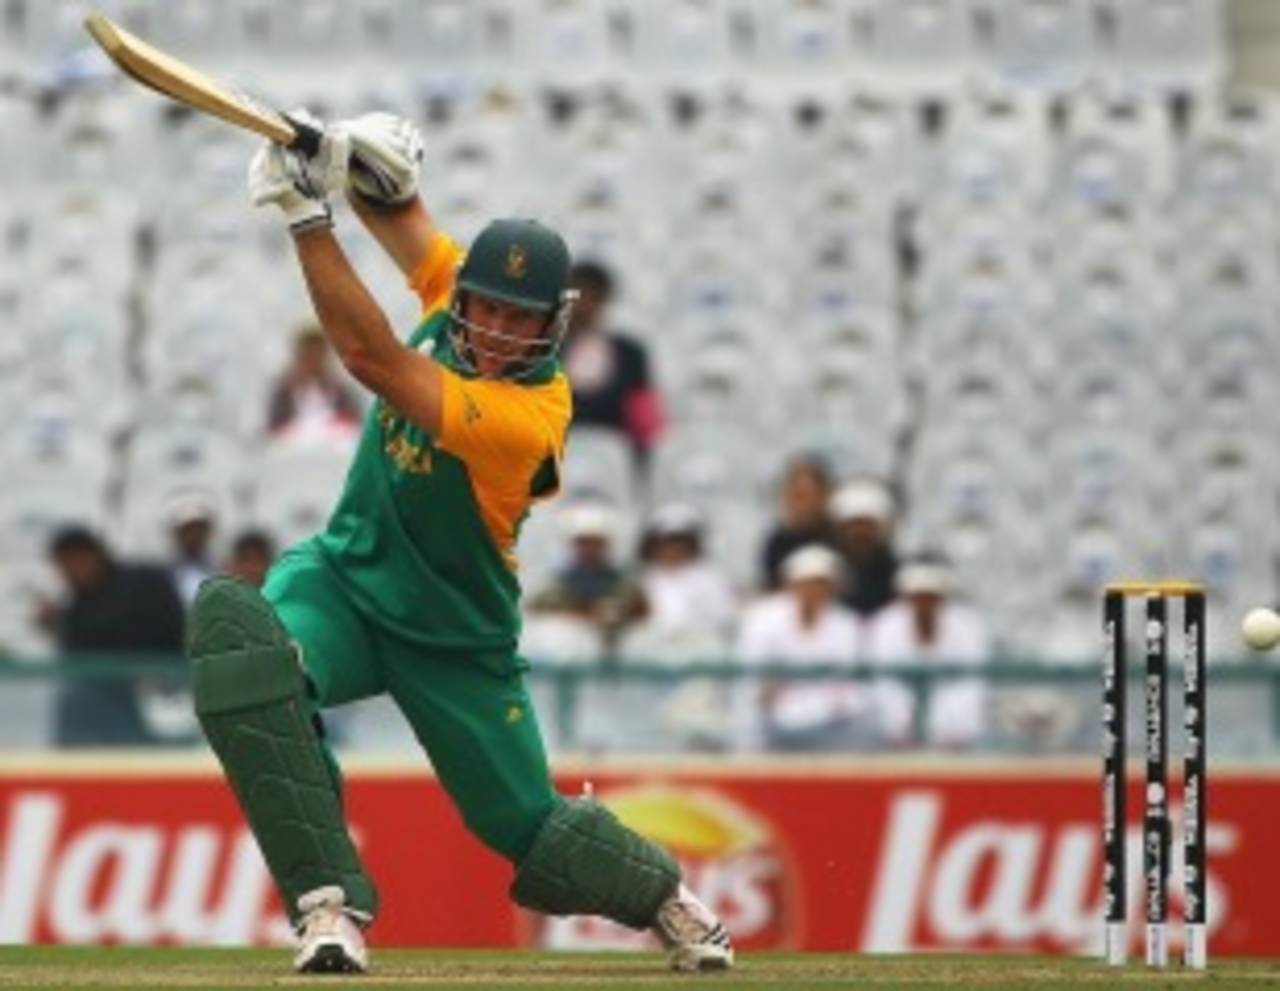 Graeme Smith drives towards cover, Netherlands v South Africa, World Cup 2011, Mohali, March 3, 2011